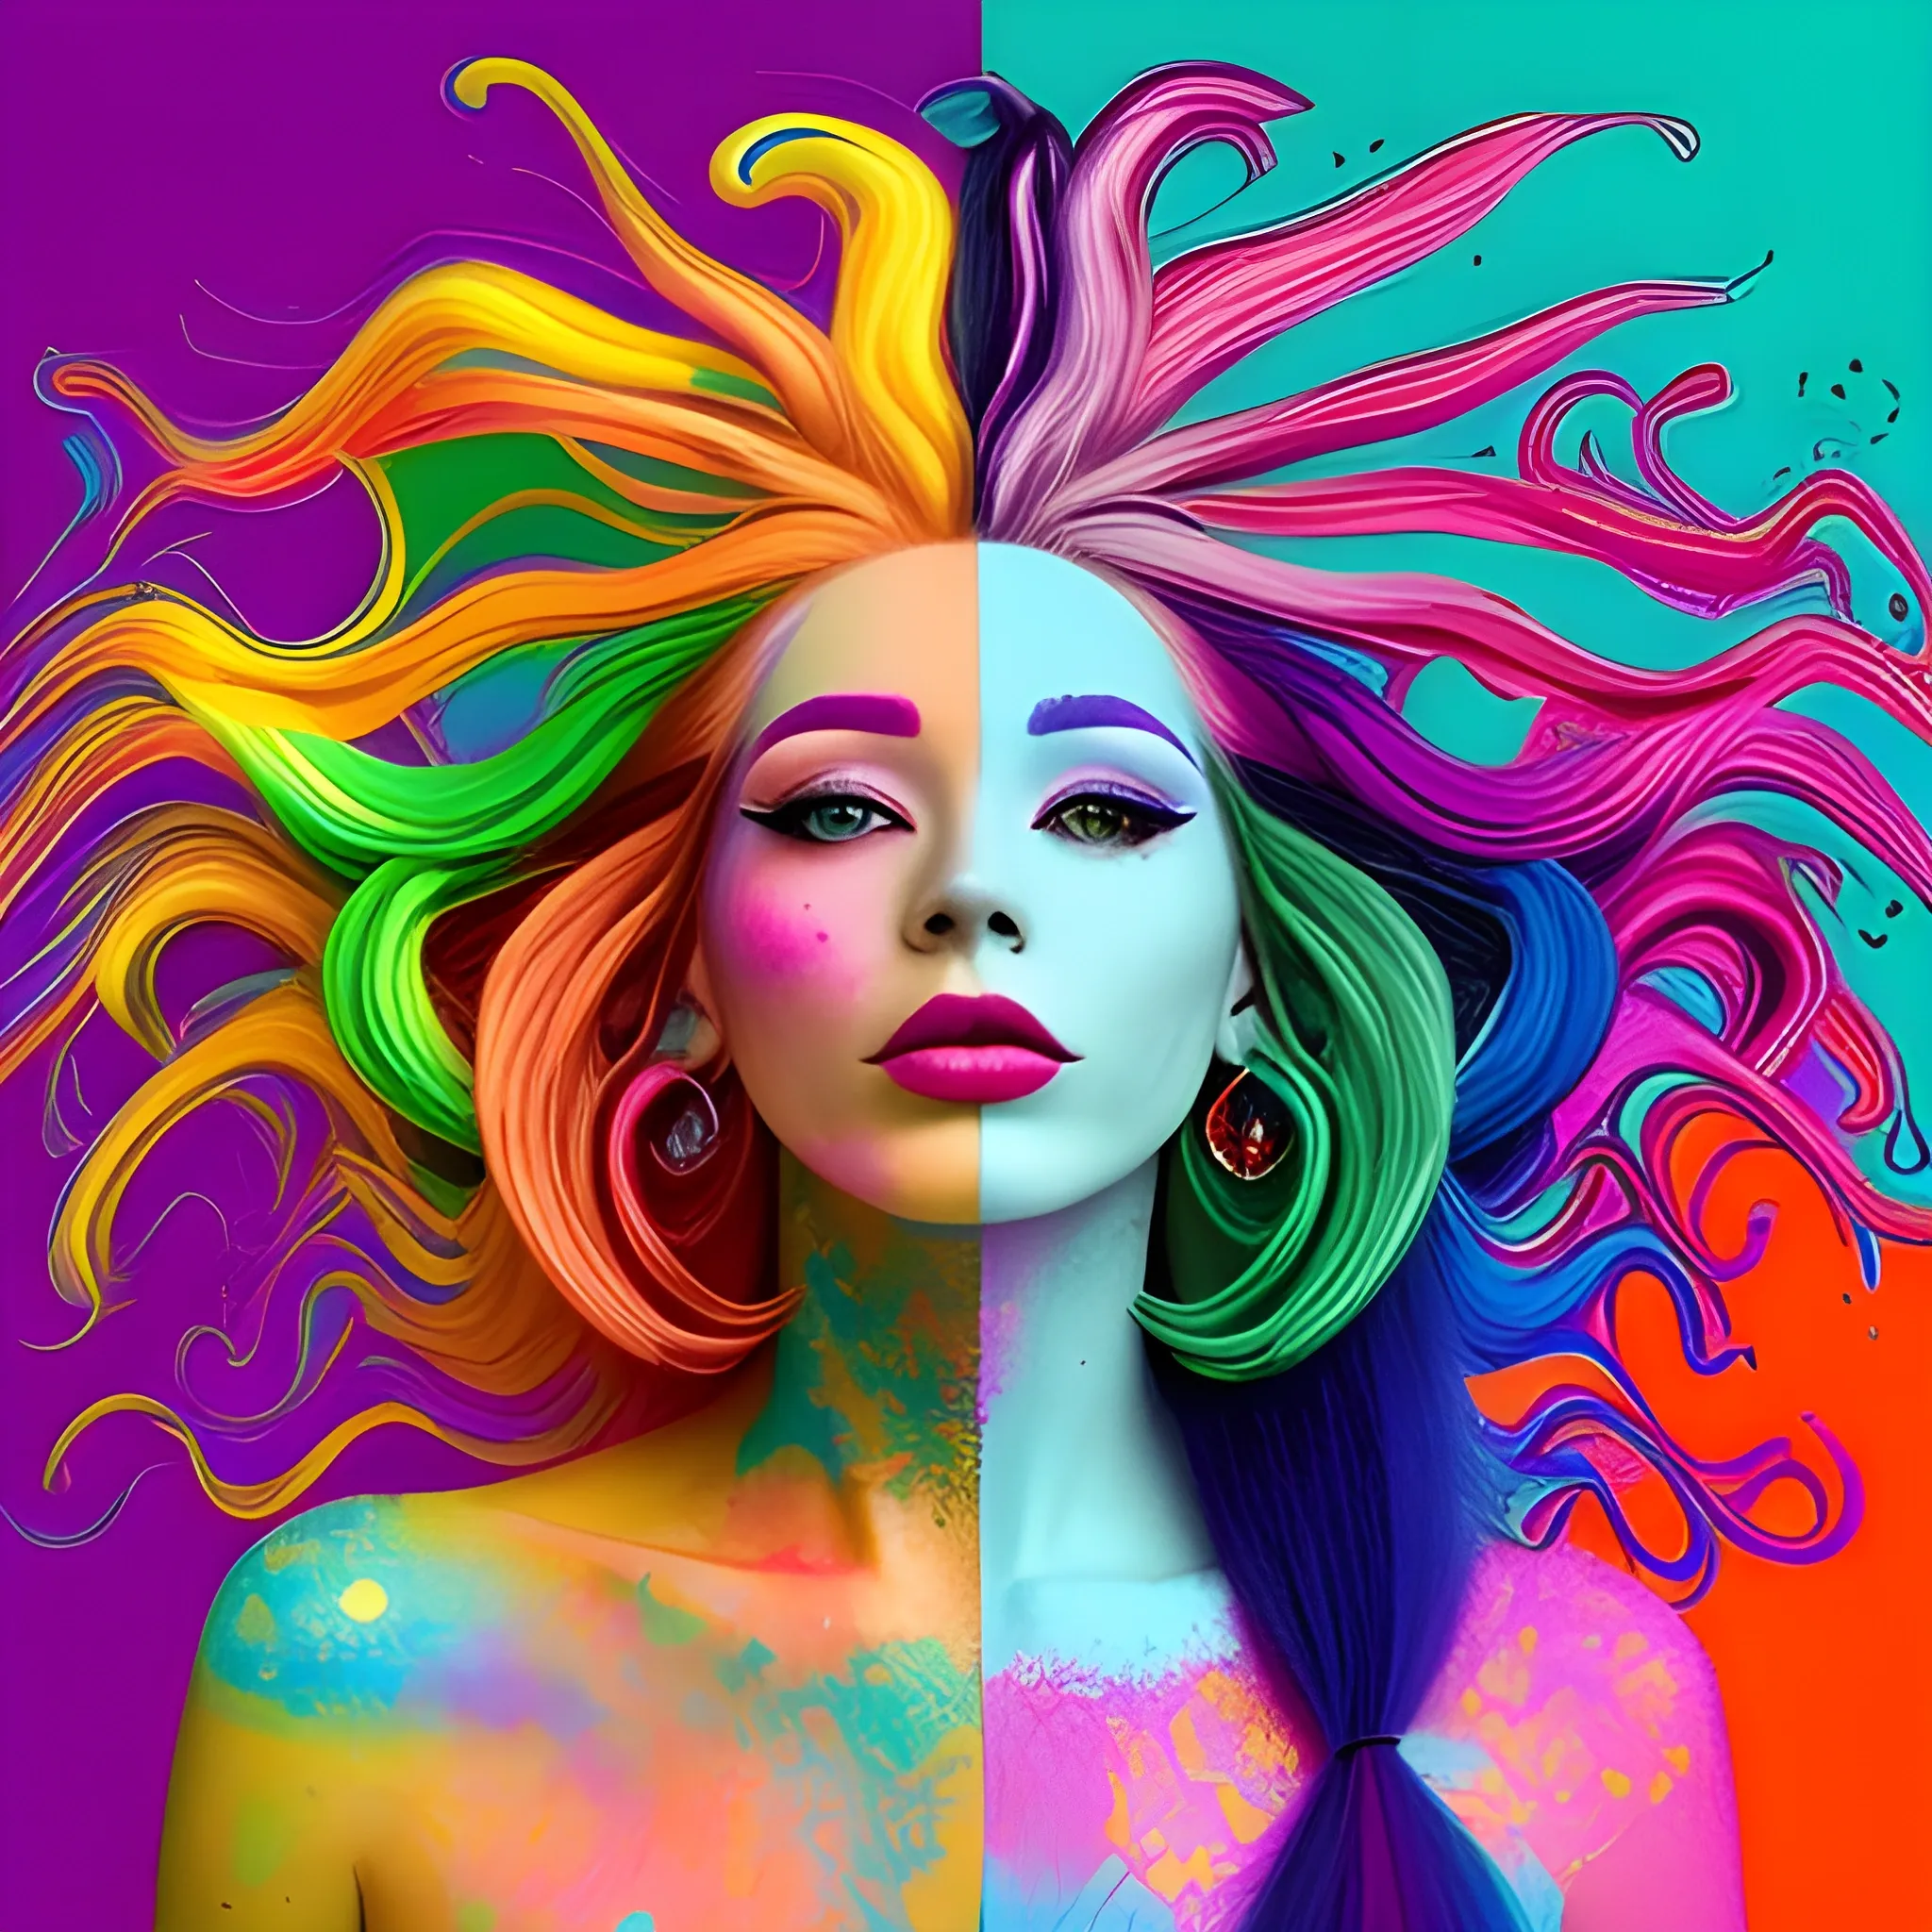 the woman is wearing multicolored hair, vibrant color scheme, Trippy